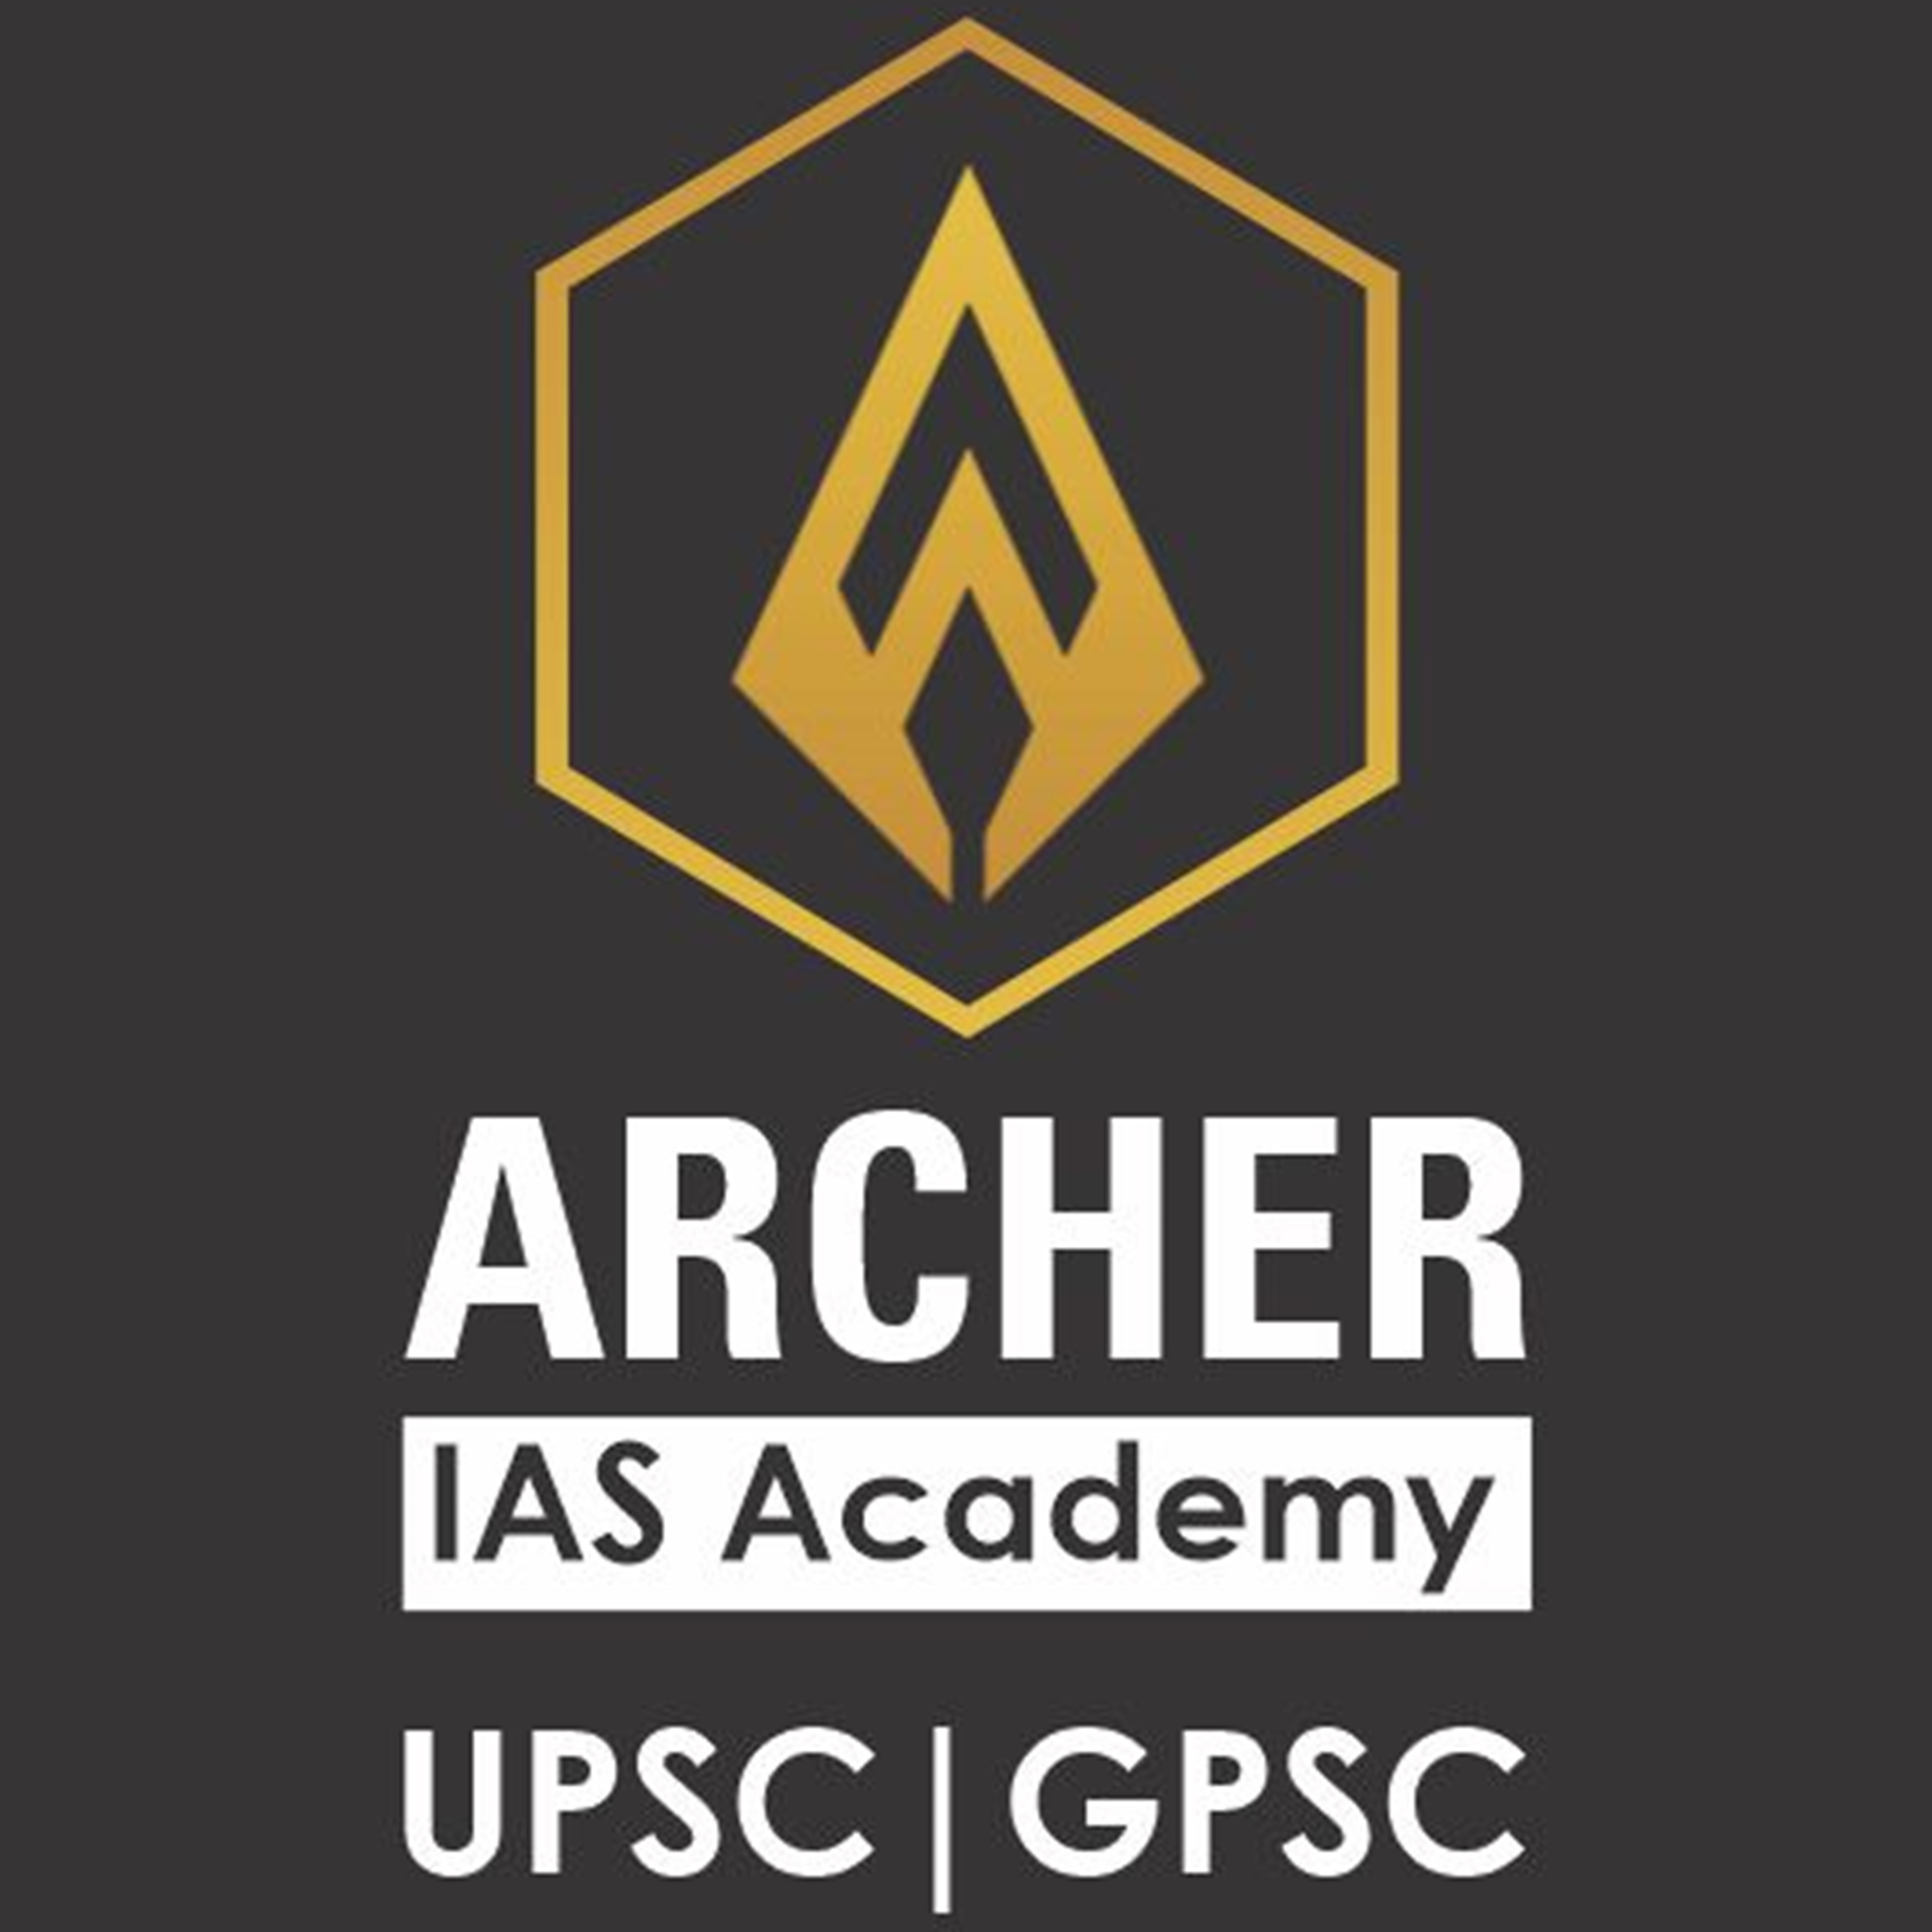 Archer' IAS Academy Best UPSC GPSC IAS IPS Civil Services Coaching in Ahmedabad (Gujarat) and New De